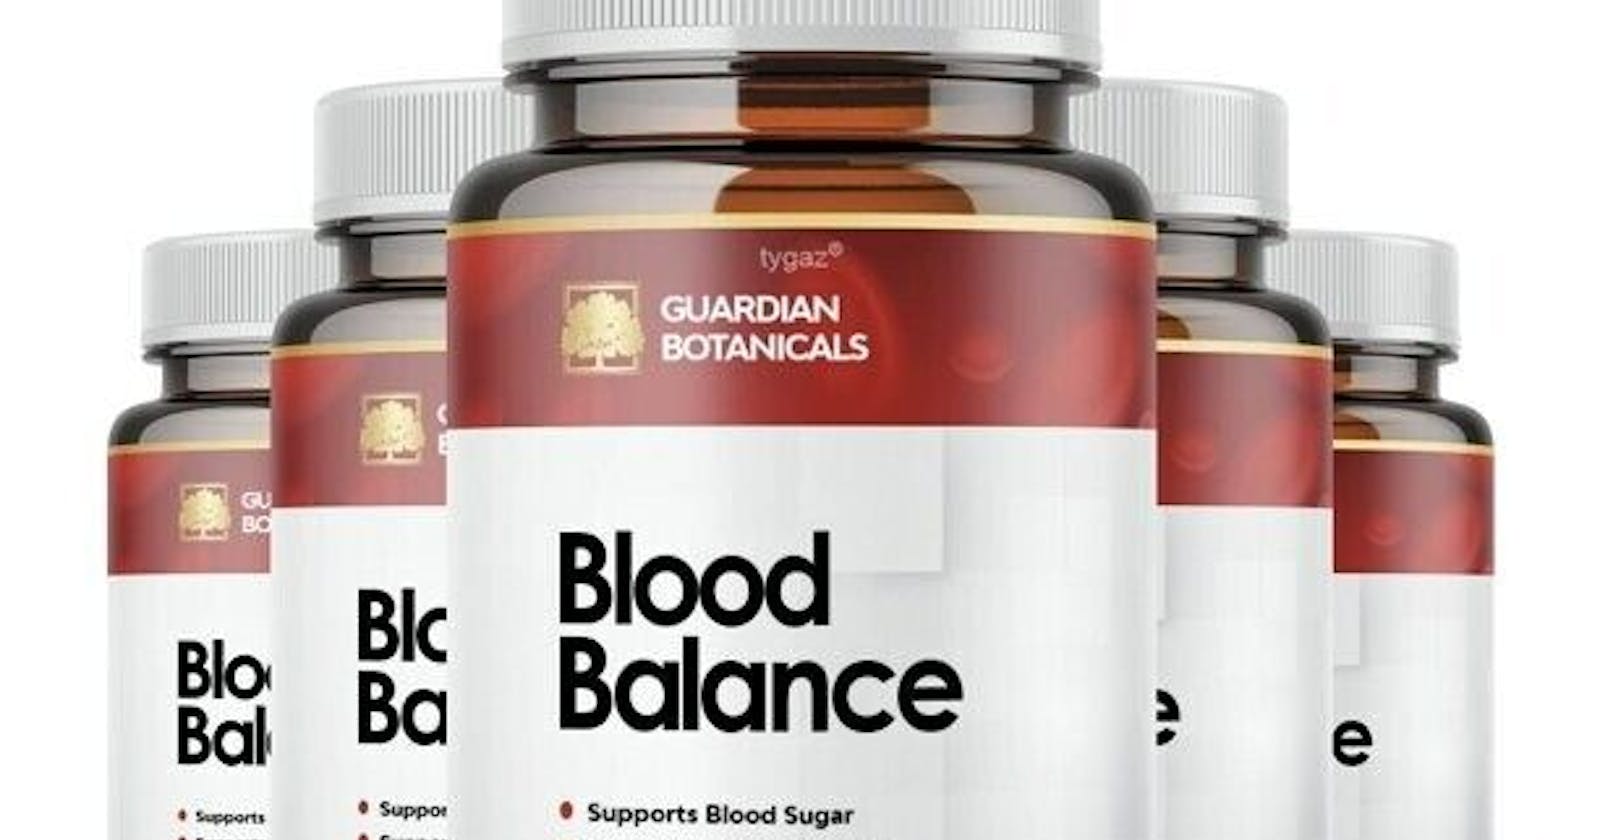 [Exposed] Guardian Blood Balance New Zealand Review - Does it Work? Read Reviews, Ingredients, Cost!!